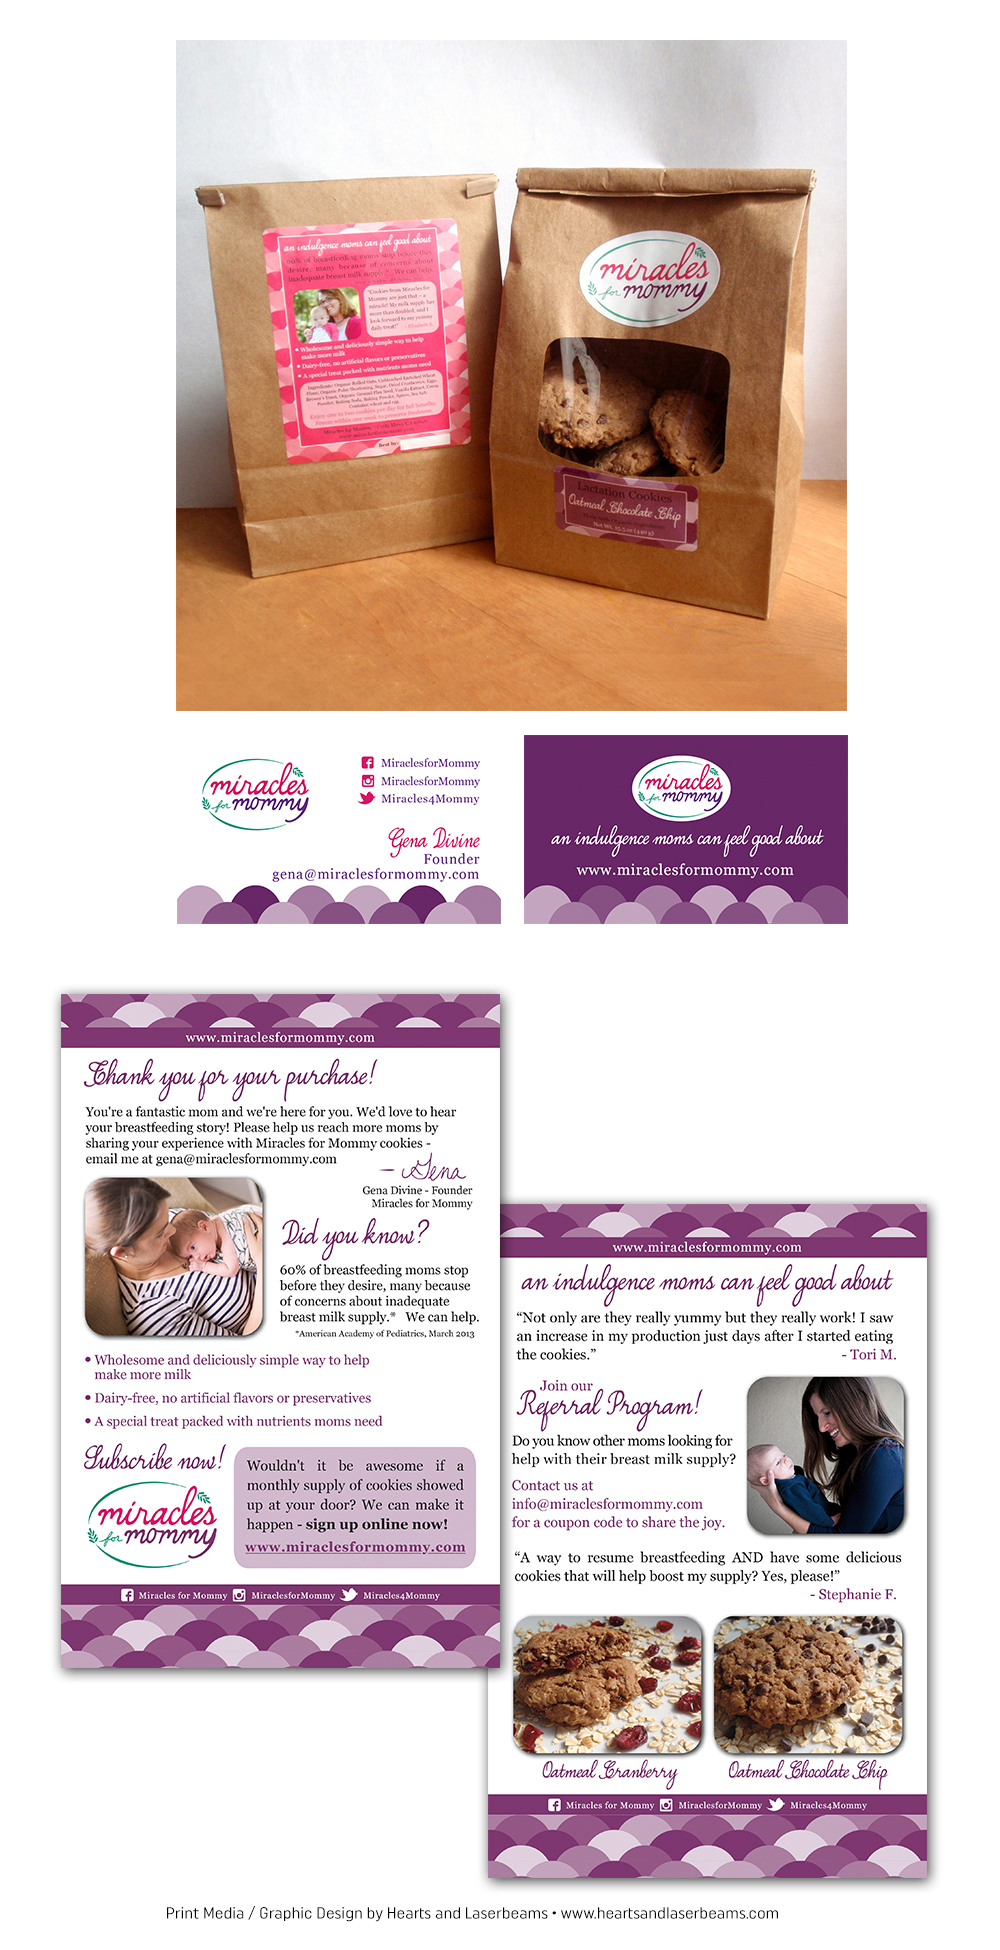 Print Media - Graphic Design Portfolio - Packaging Label Design and Postcard layout for Miracles for Mommy by Hearts and Laserbeams